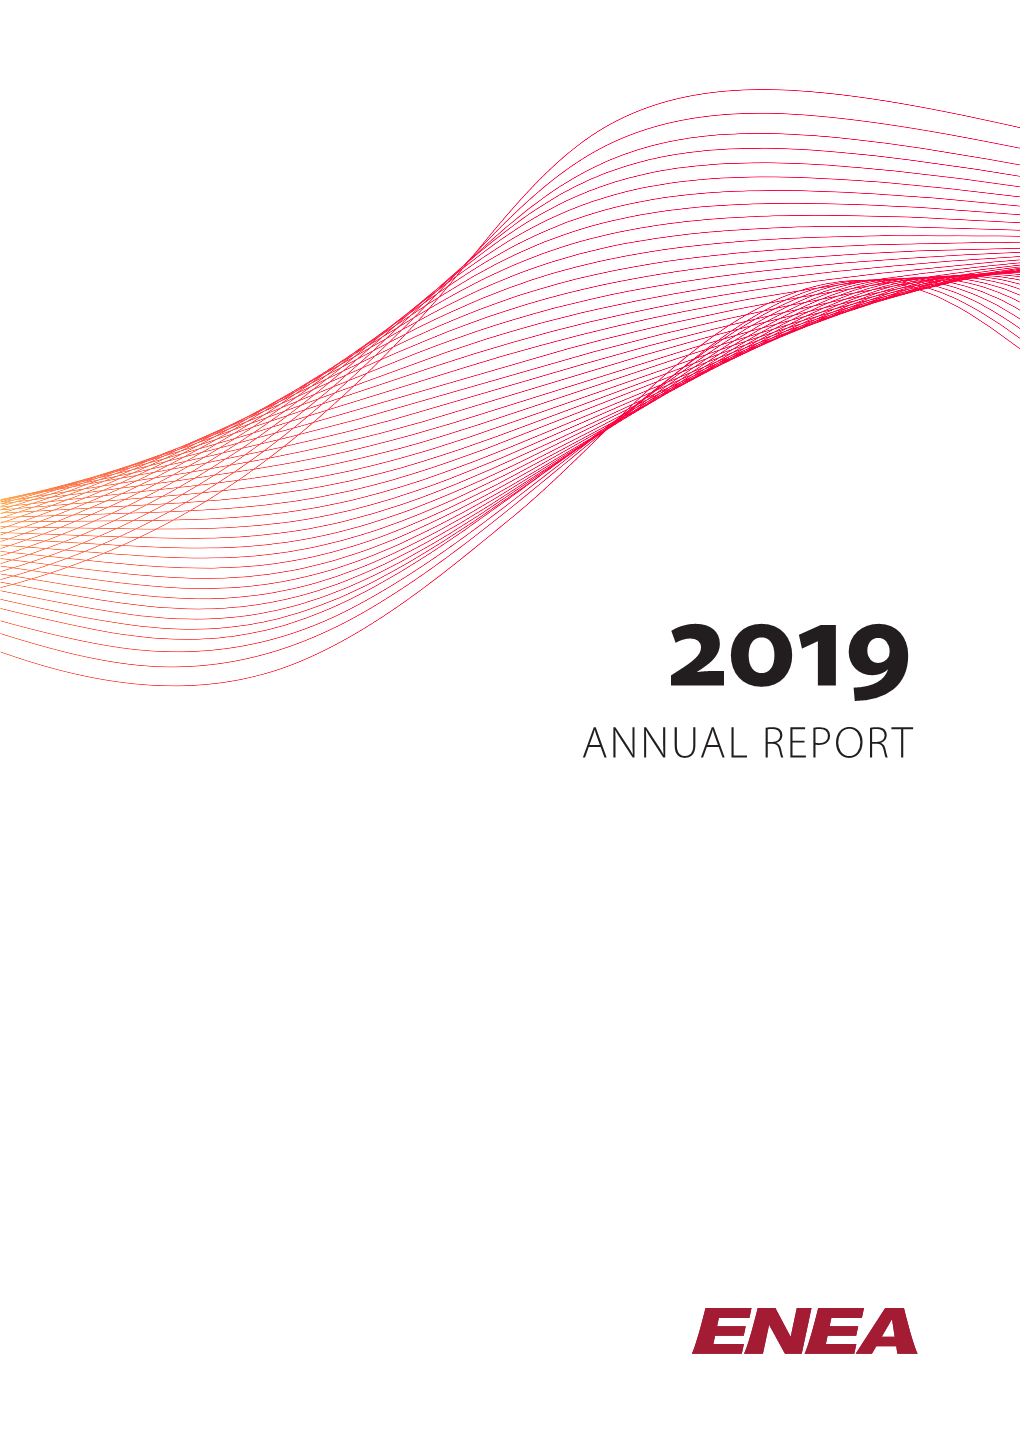 ANNUAL REPORT 2019 Contents